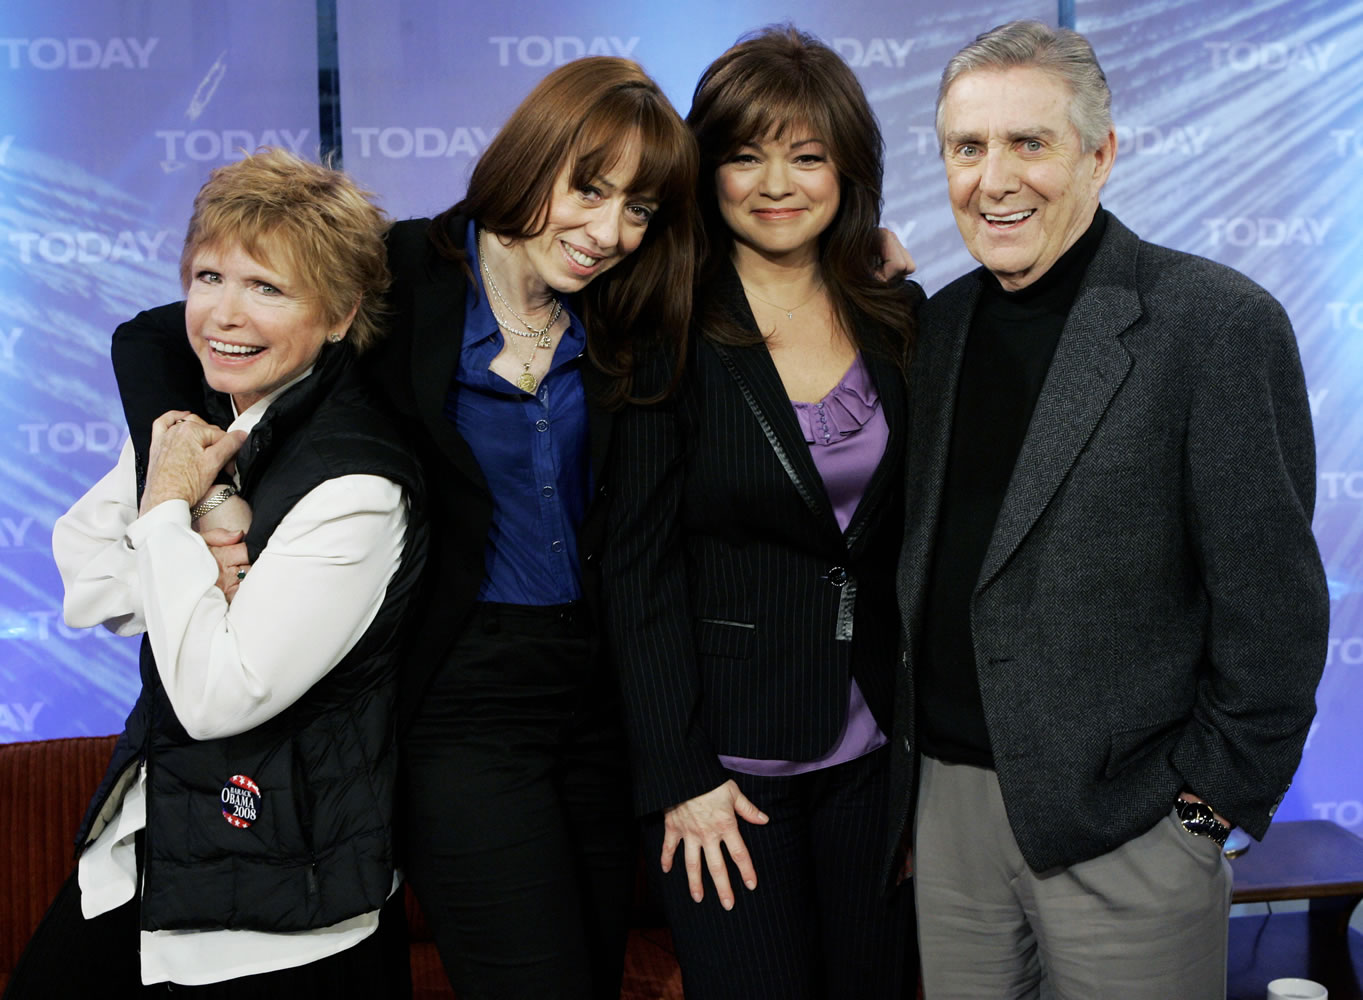 Bonnie Franklin, left, reunites with her &quot;One Day at a Time&quot; castmates on &quot;The Today Show&quot; in February 2008.